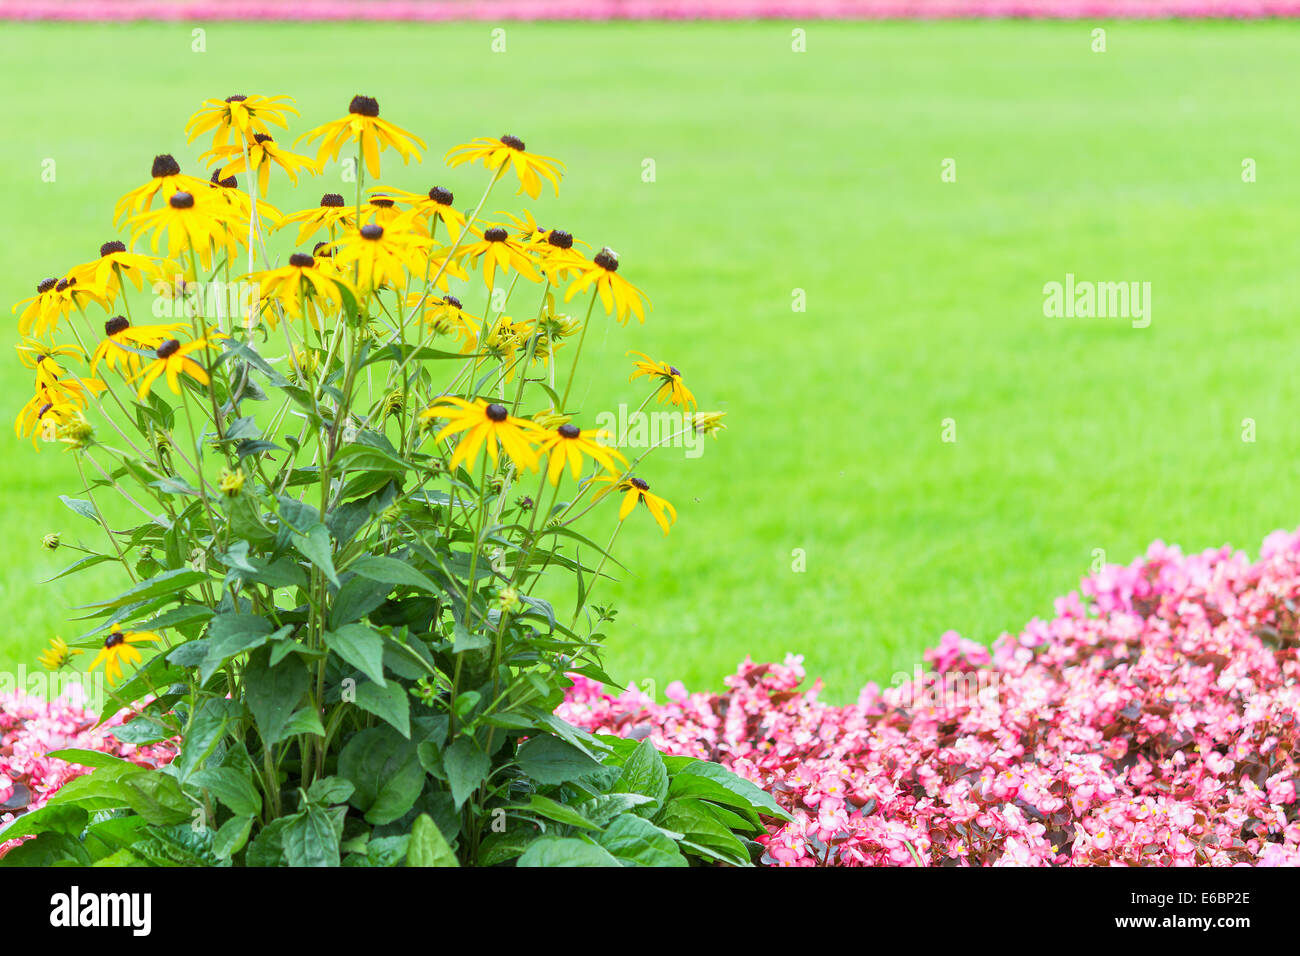 Floral frame backdrop with yellow and pink garden flowers against blurred green fresh grass with free copy-space place text Stock Photo